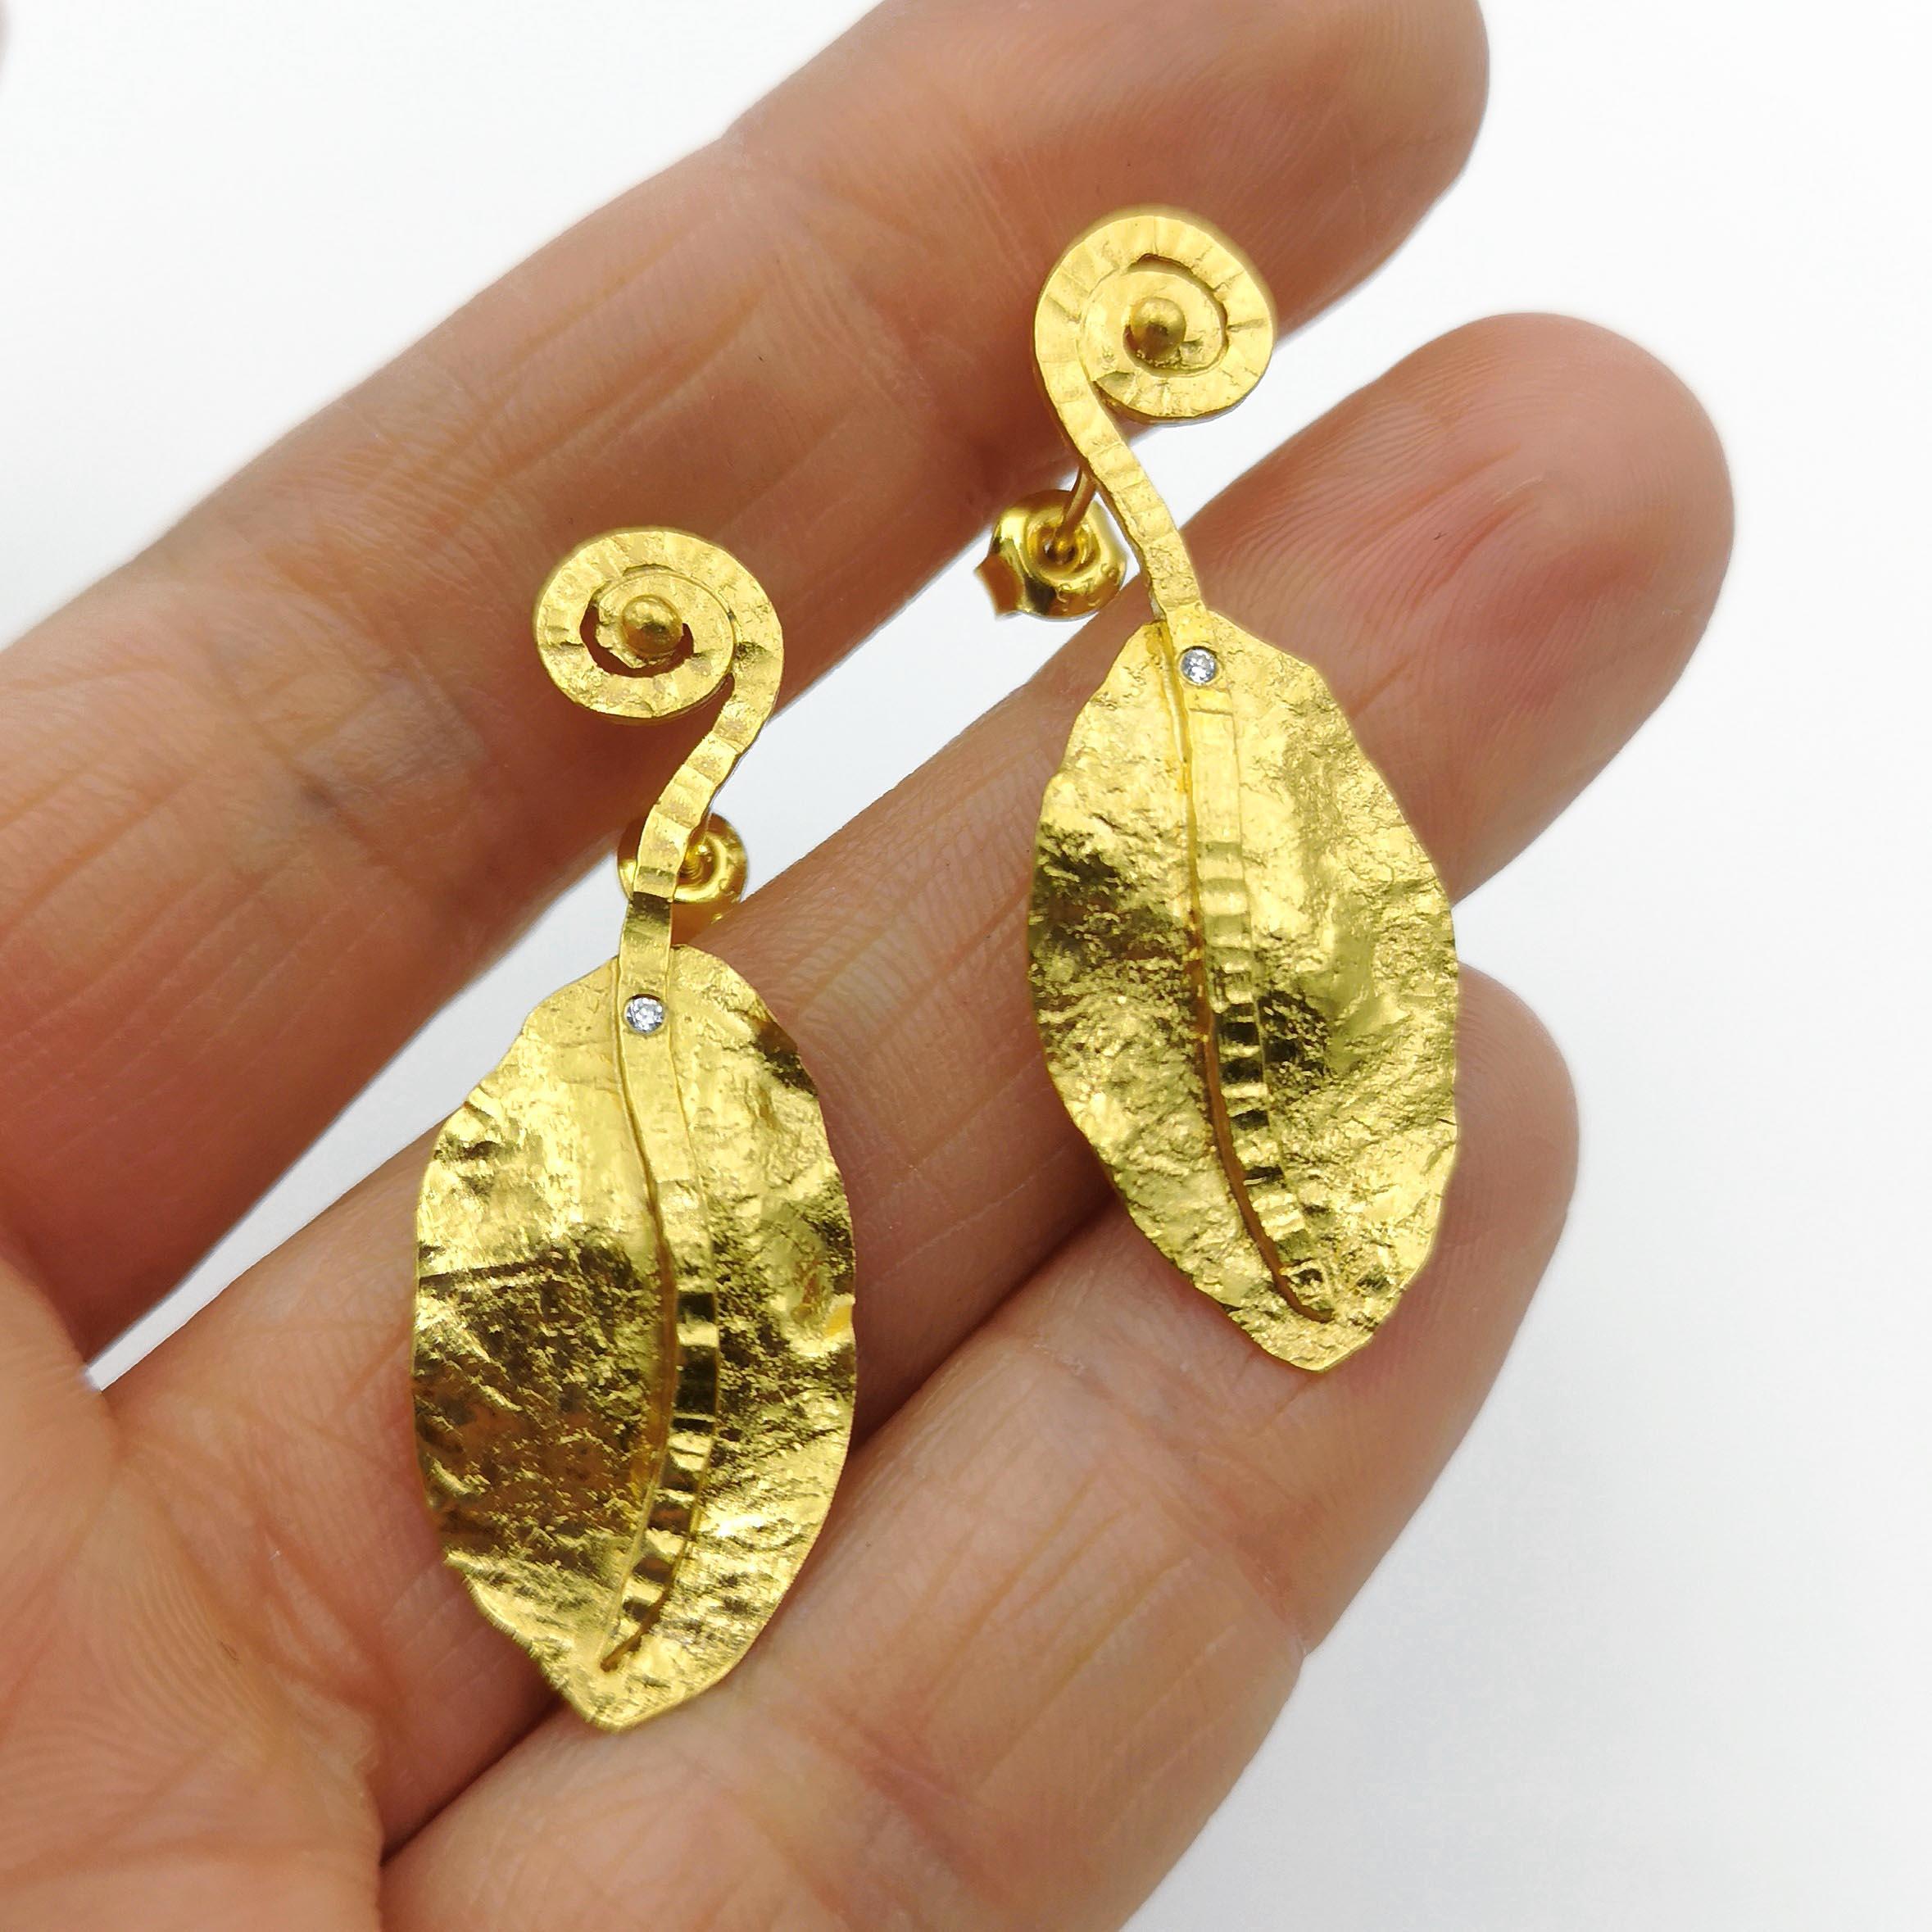 Zircon Gold Plate Silver Hand Made Artist Design Stud Earrings
Hand made earrings inspired by archeology, ancient cultures.
Hammered wavy leaves decorated with cubic zirconia (1.2mm) made of gilded silver. The uneven surface shows the play of light